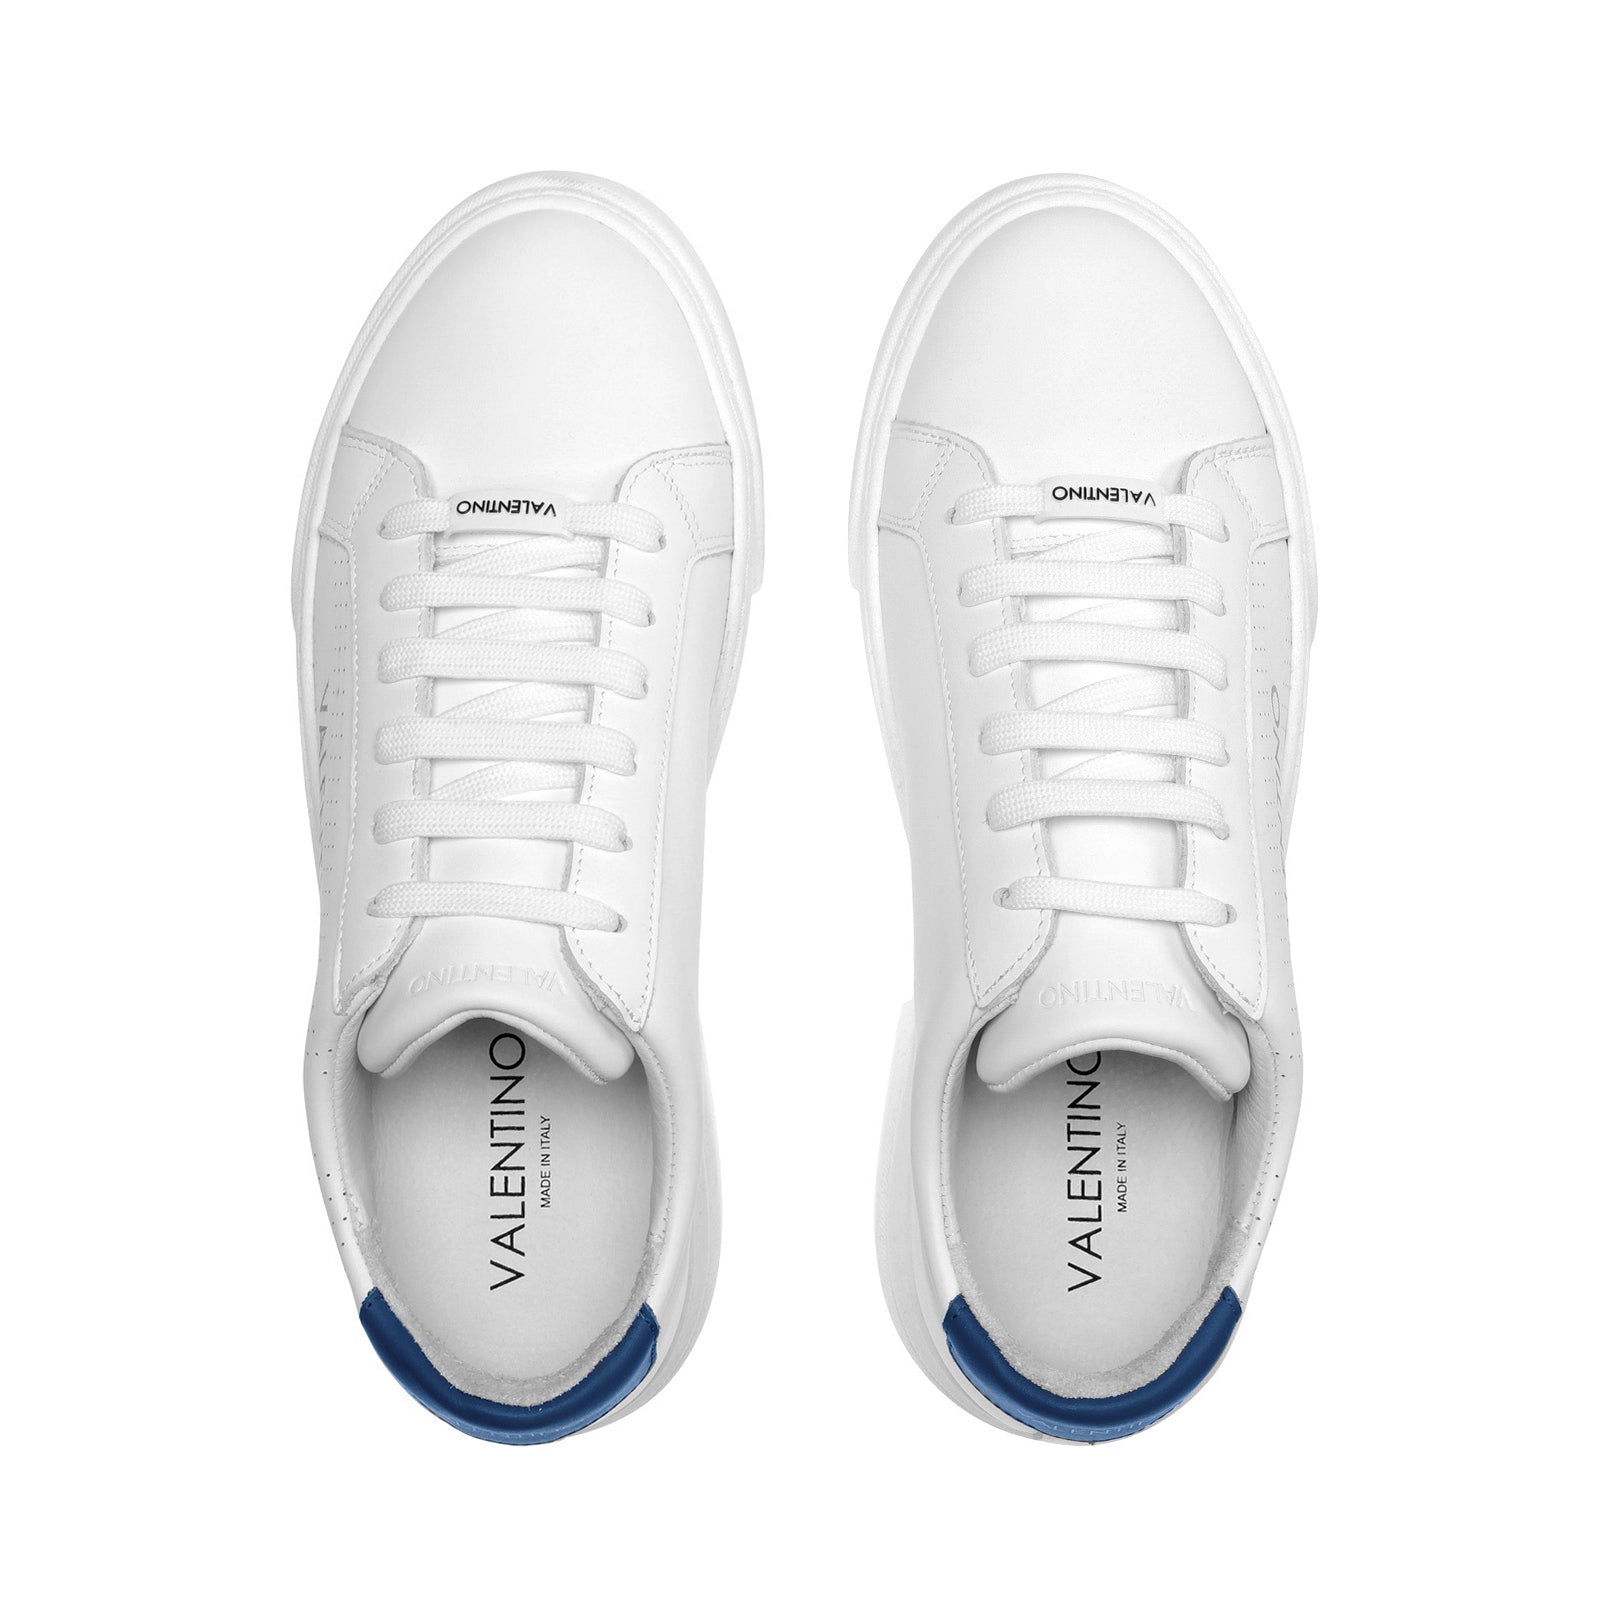 Men's Sneakers White Leather an Blue Insert – Shoes UAE